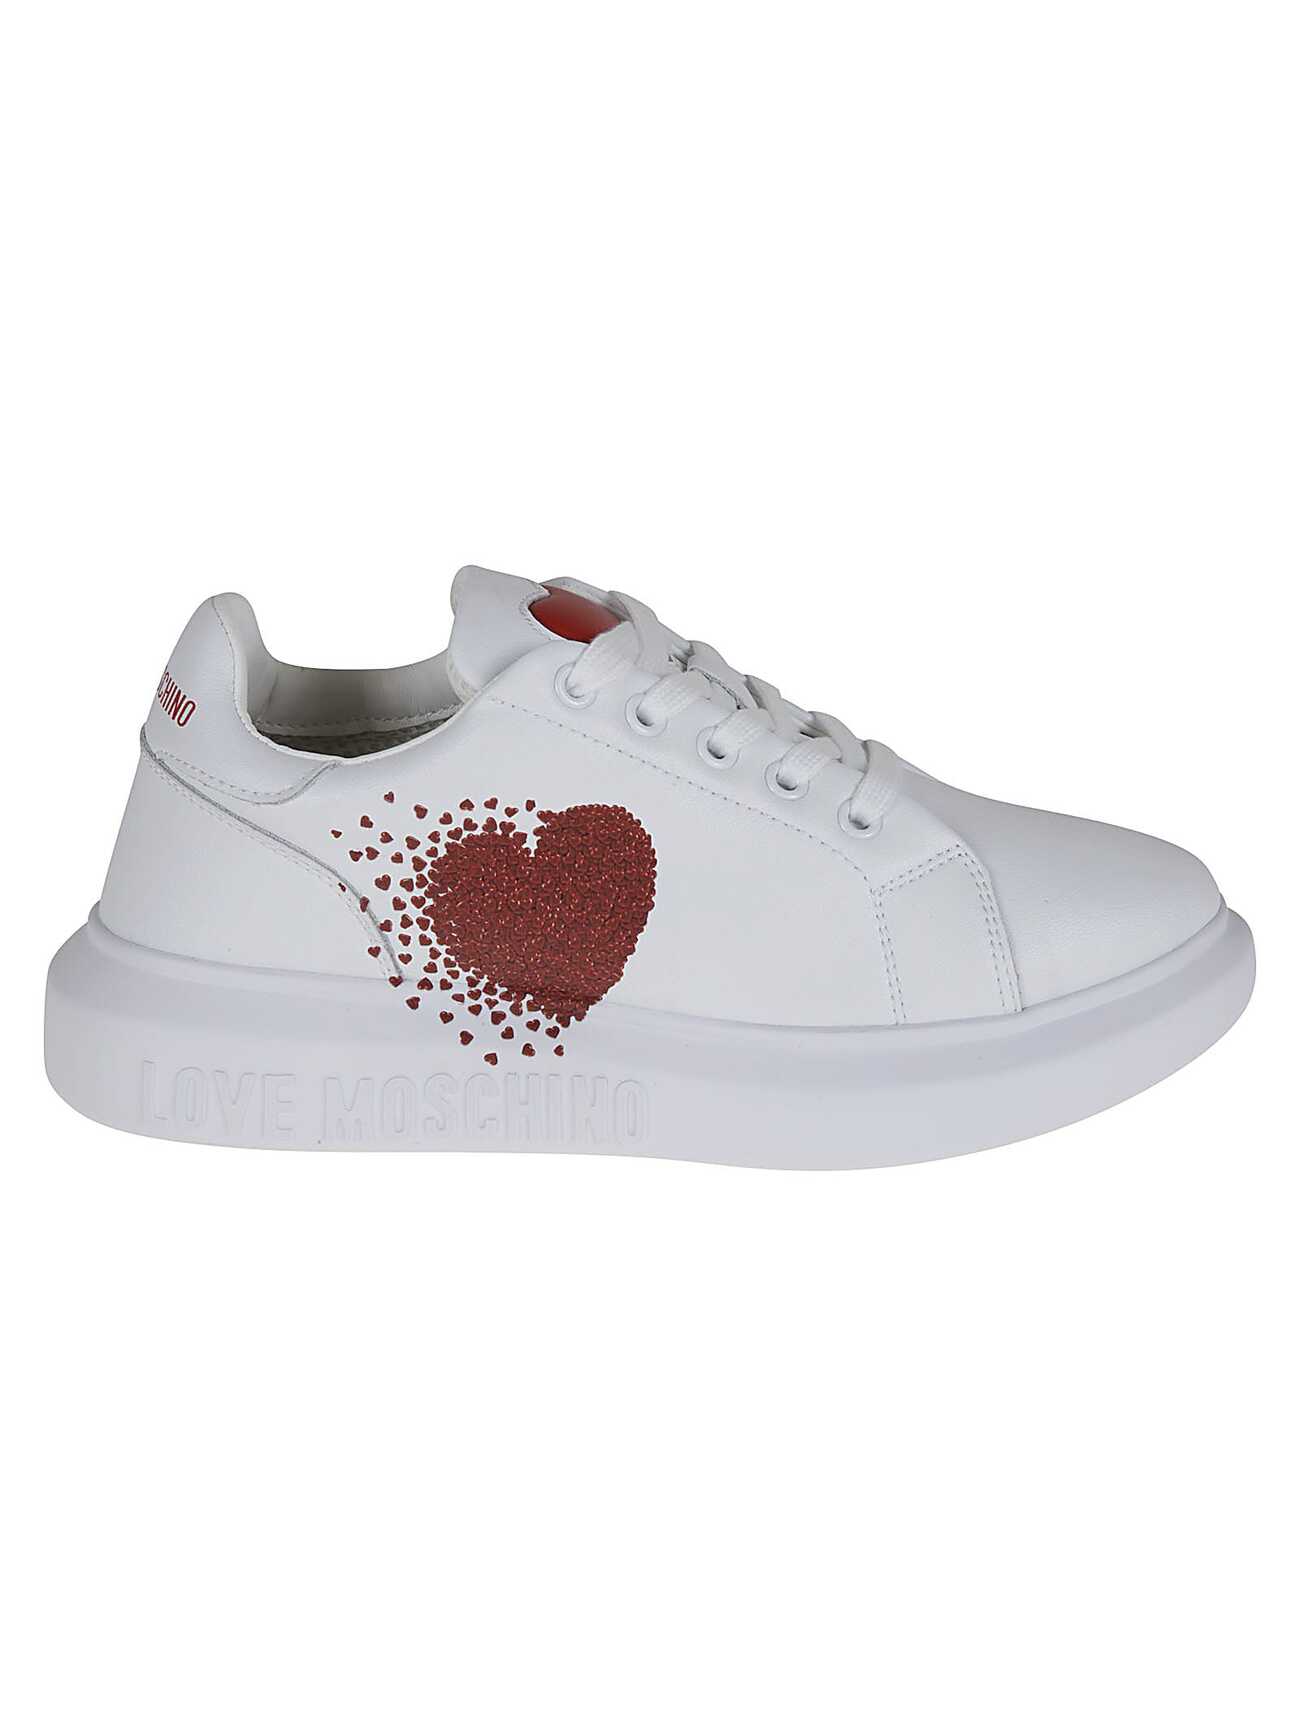 Love Moschino Heart Patched Logo Sneakers in black